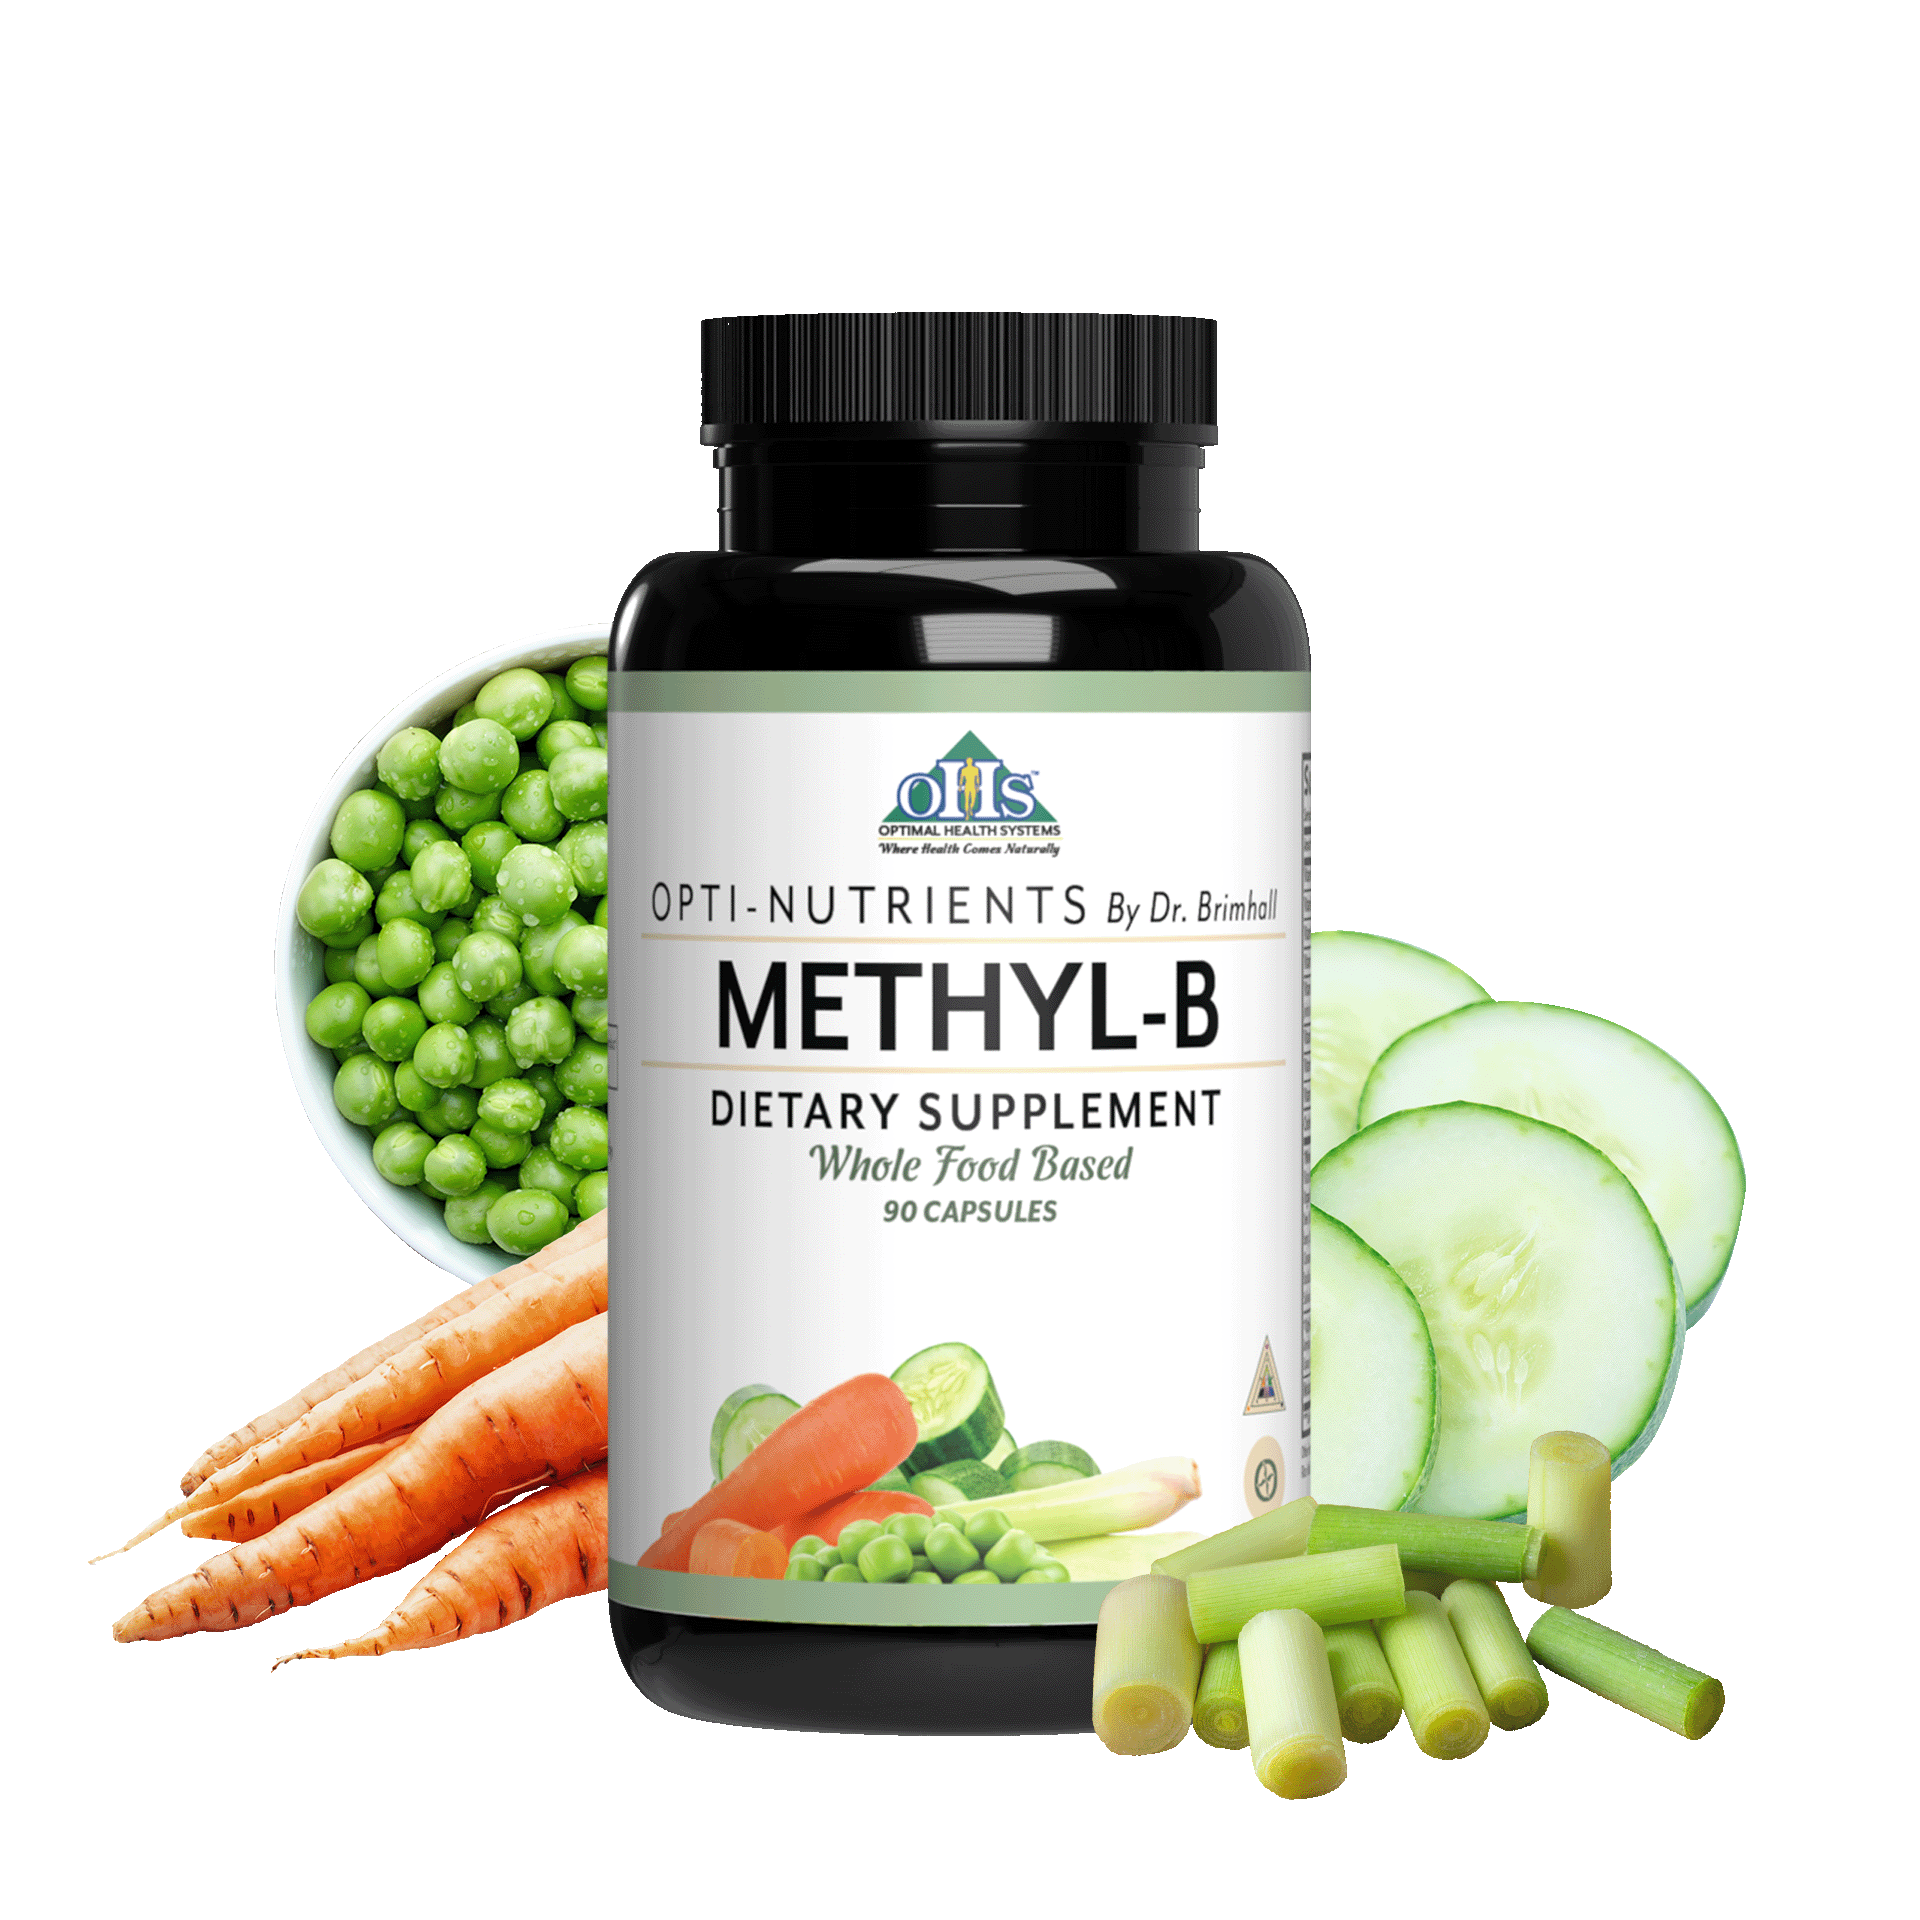 Image of a bottle of Opti-Nutrients Methyl-B. Around the bottle are Peas, carrots, cucumbers, and lemongrass.